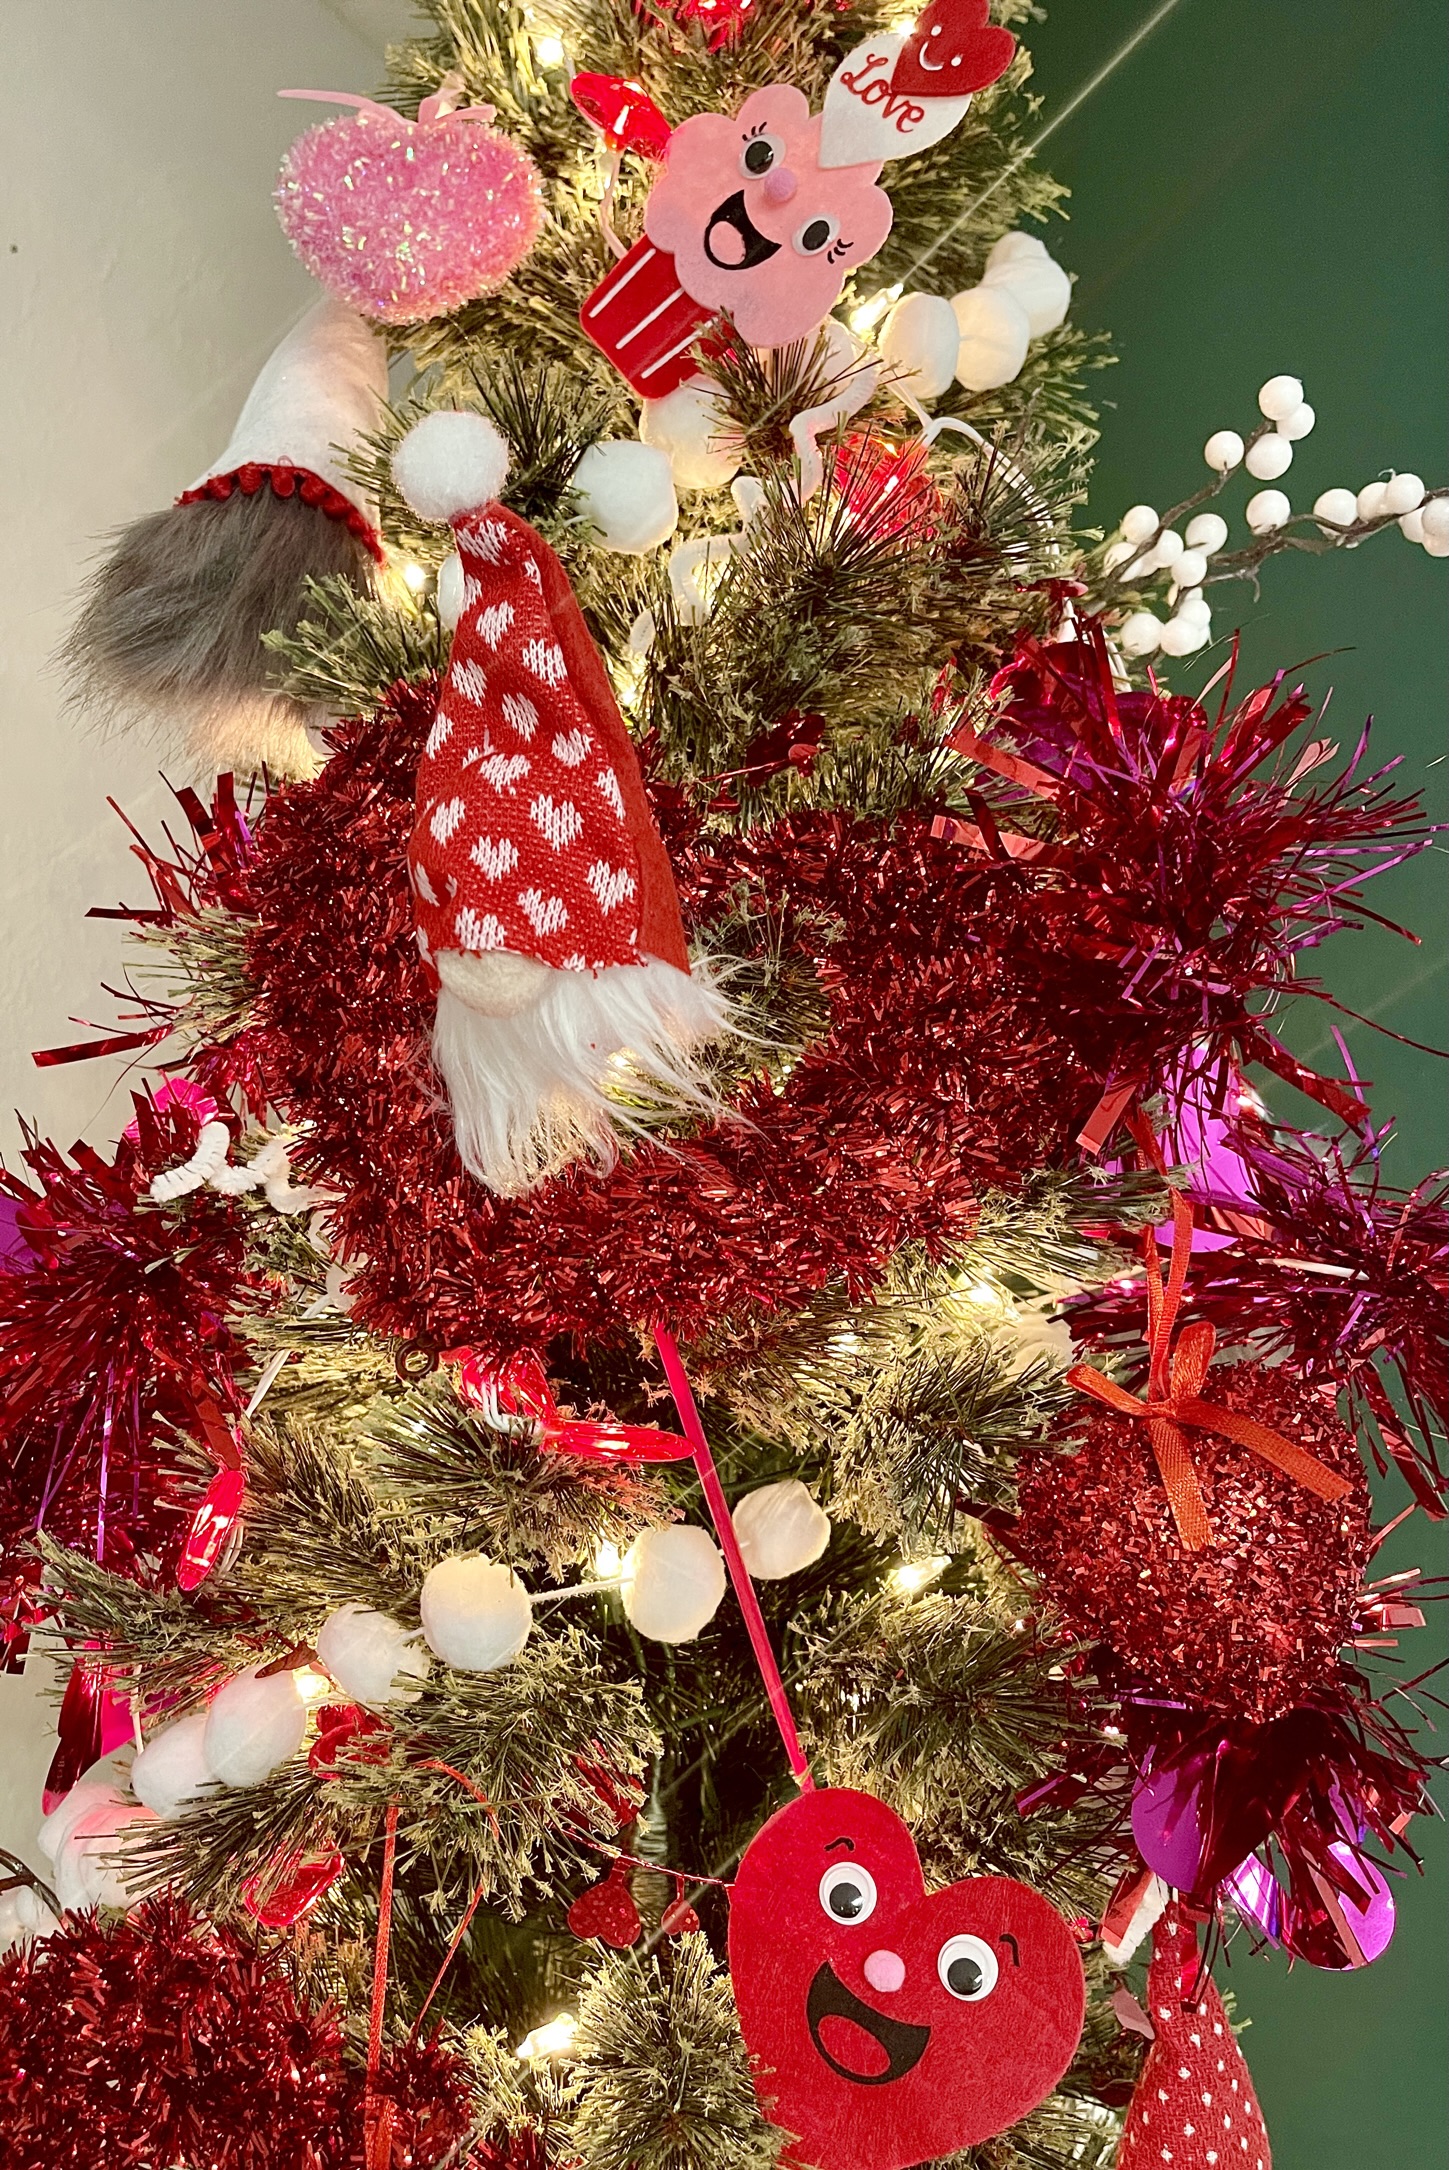 12 Best Valentine Trees - DIY Valentine's Day Trees and Decorations